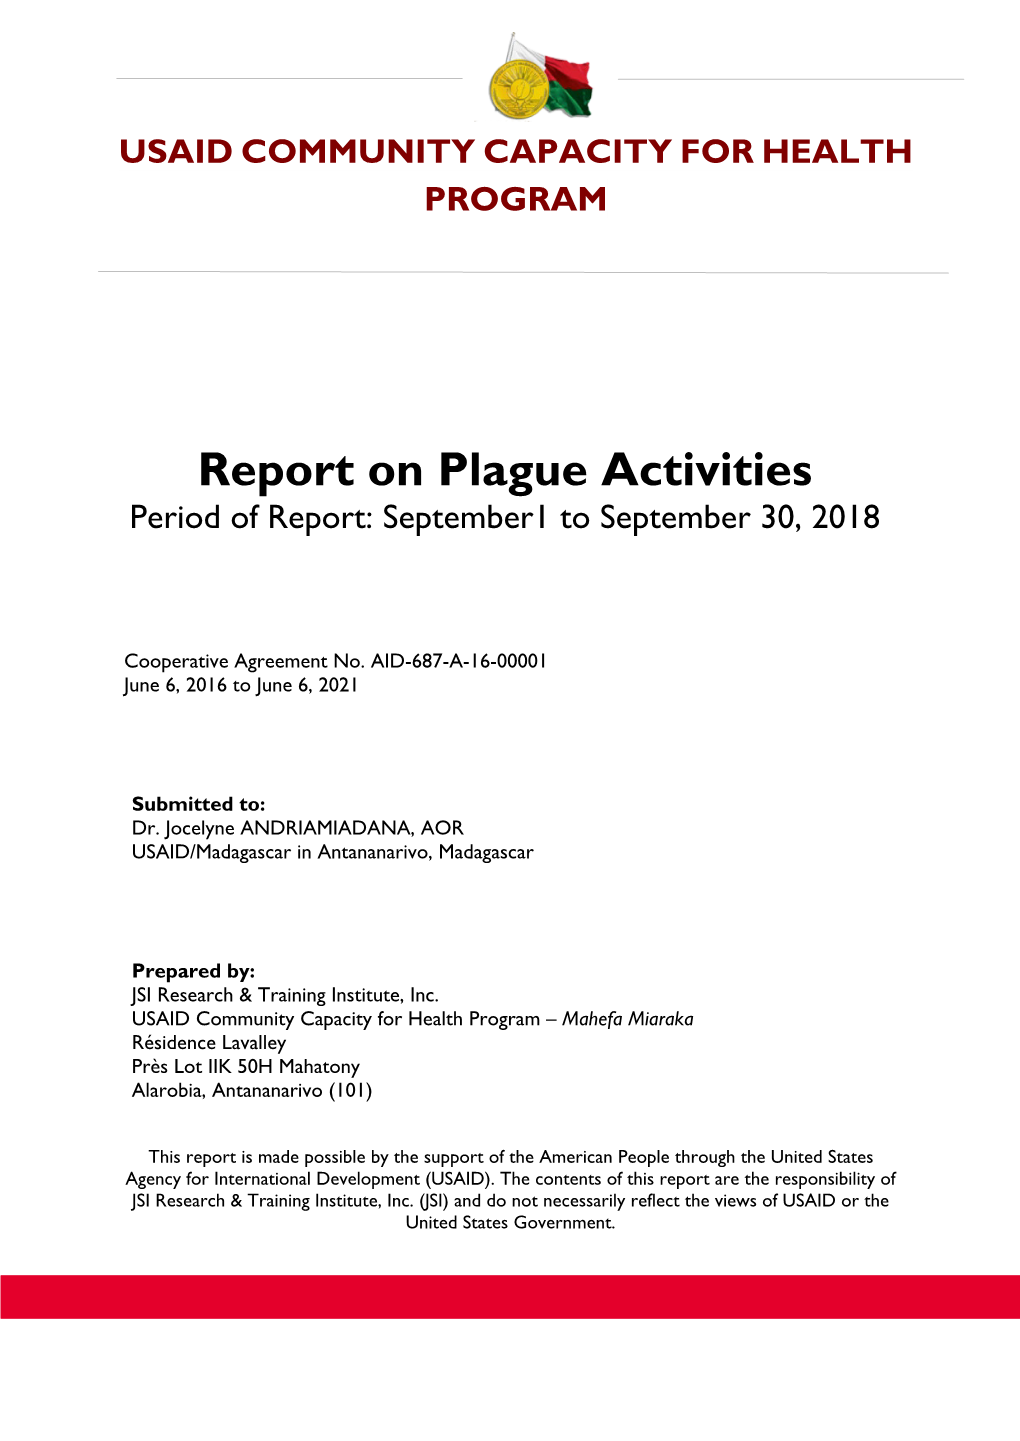 Report on Plague Activities Period of Report: September1 to September 30, 2018